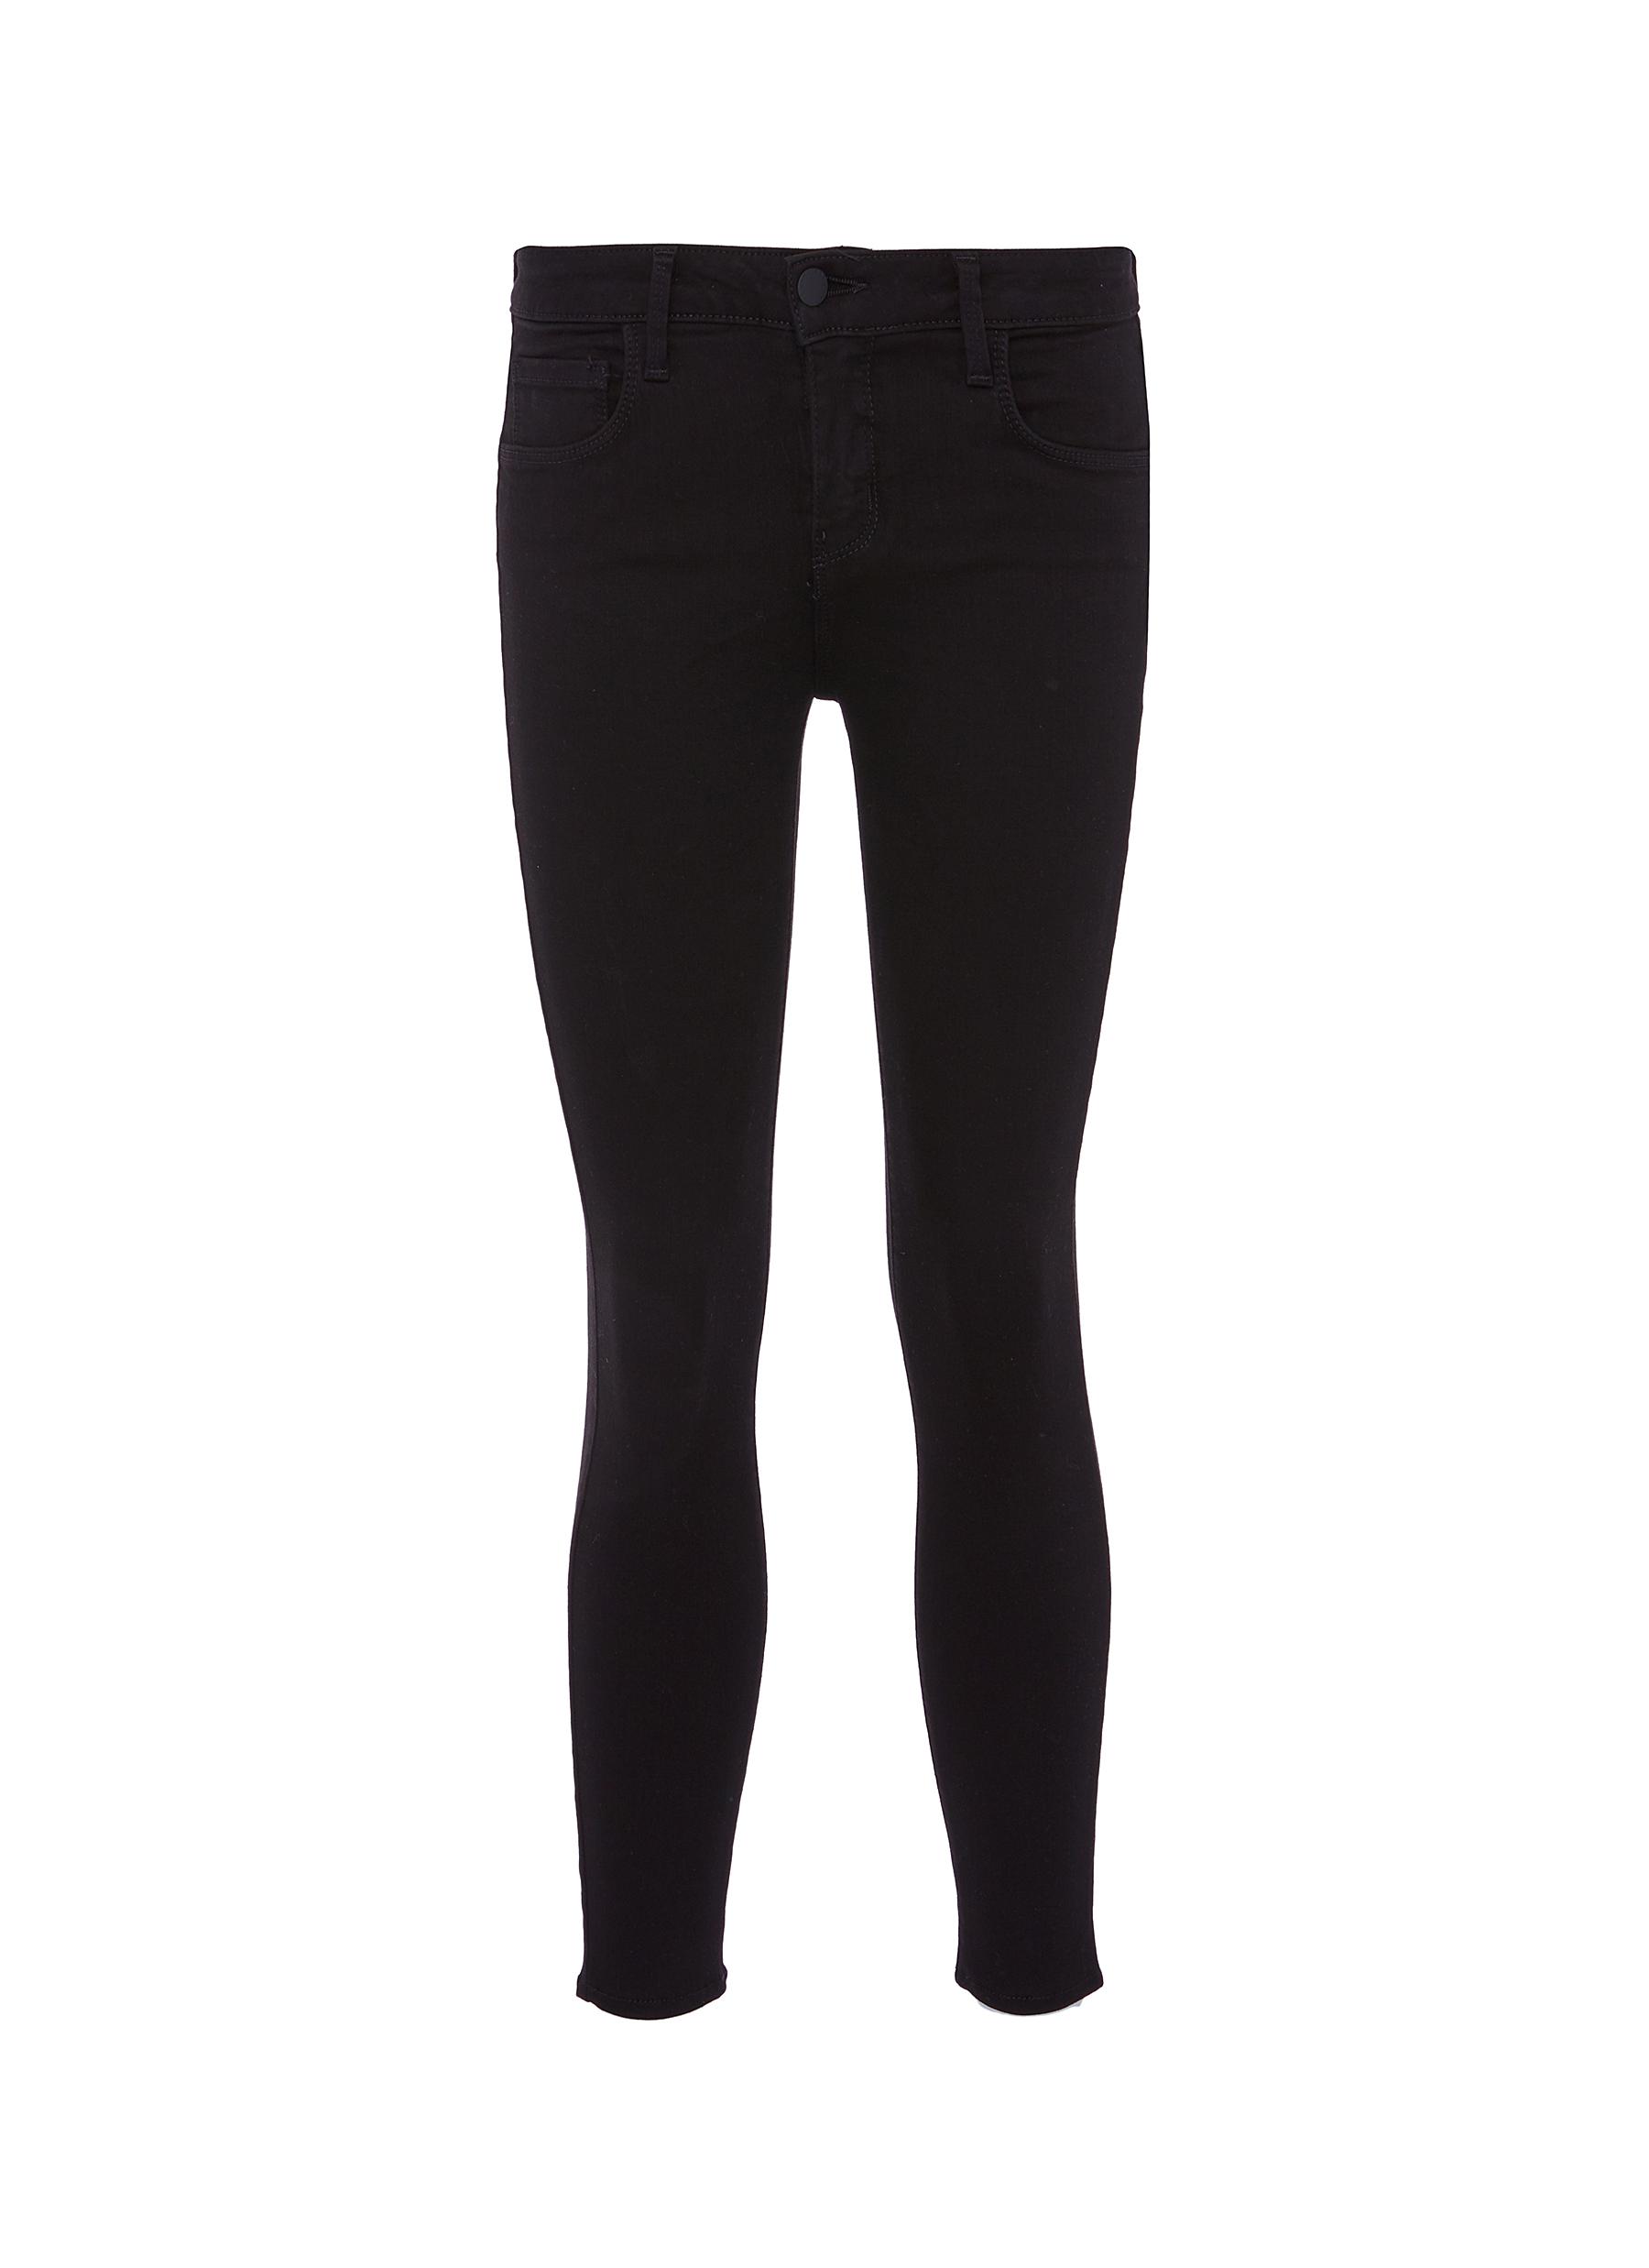 Mazzy skinny jeans by L’Agence